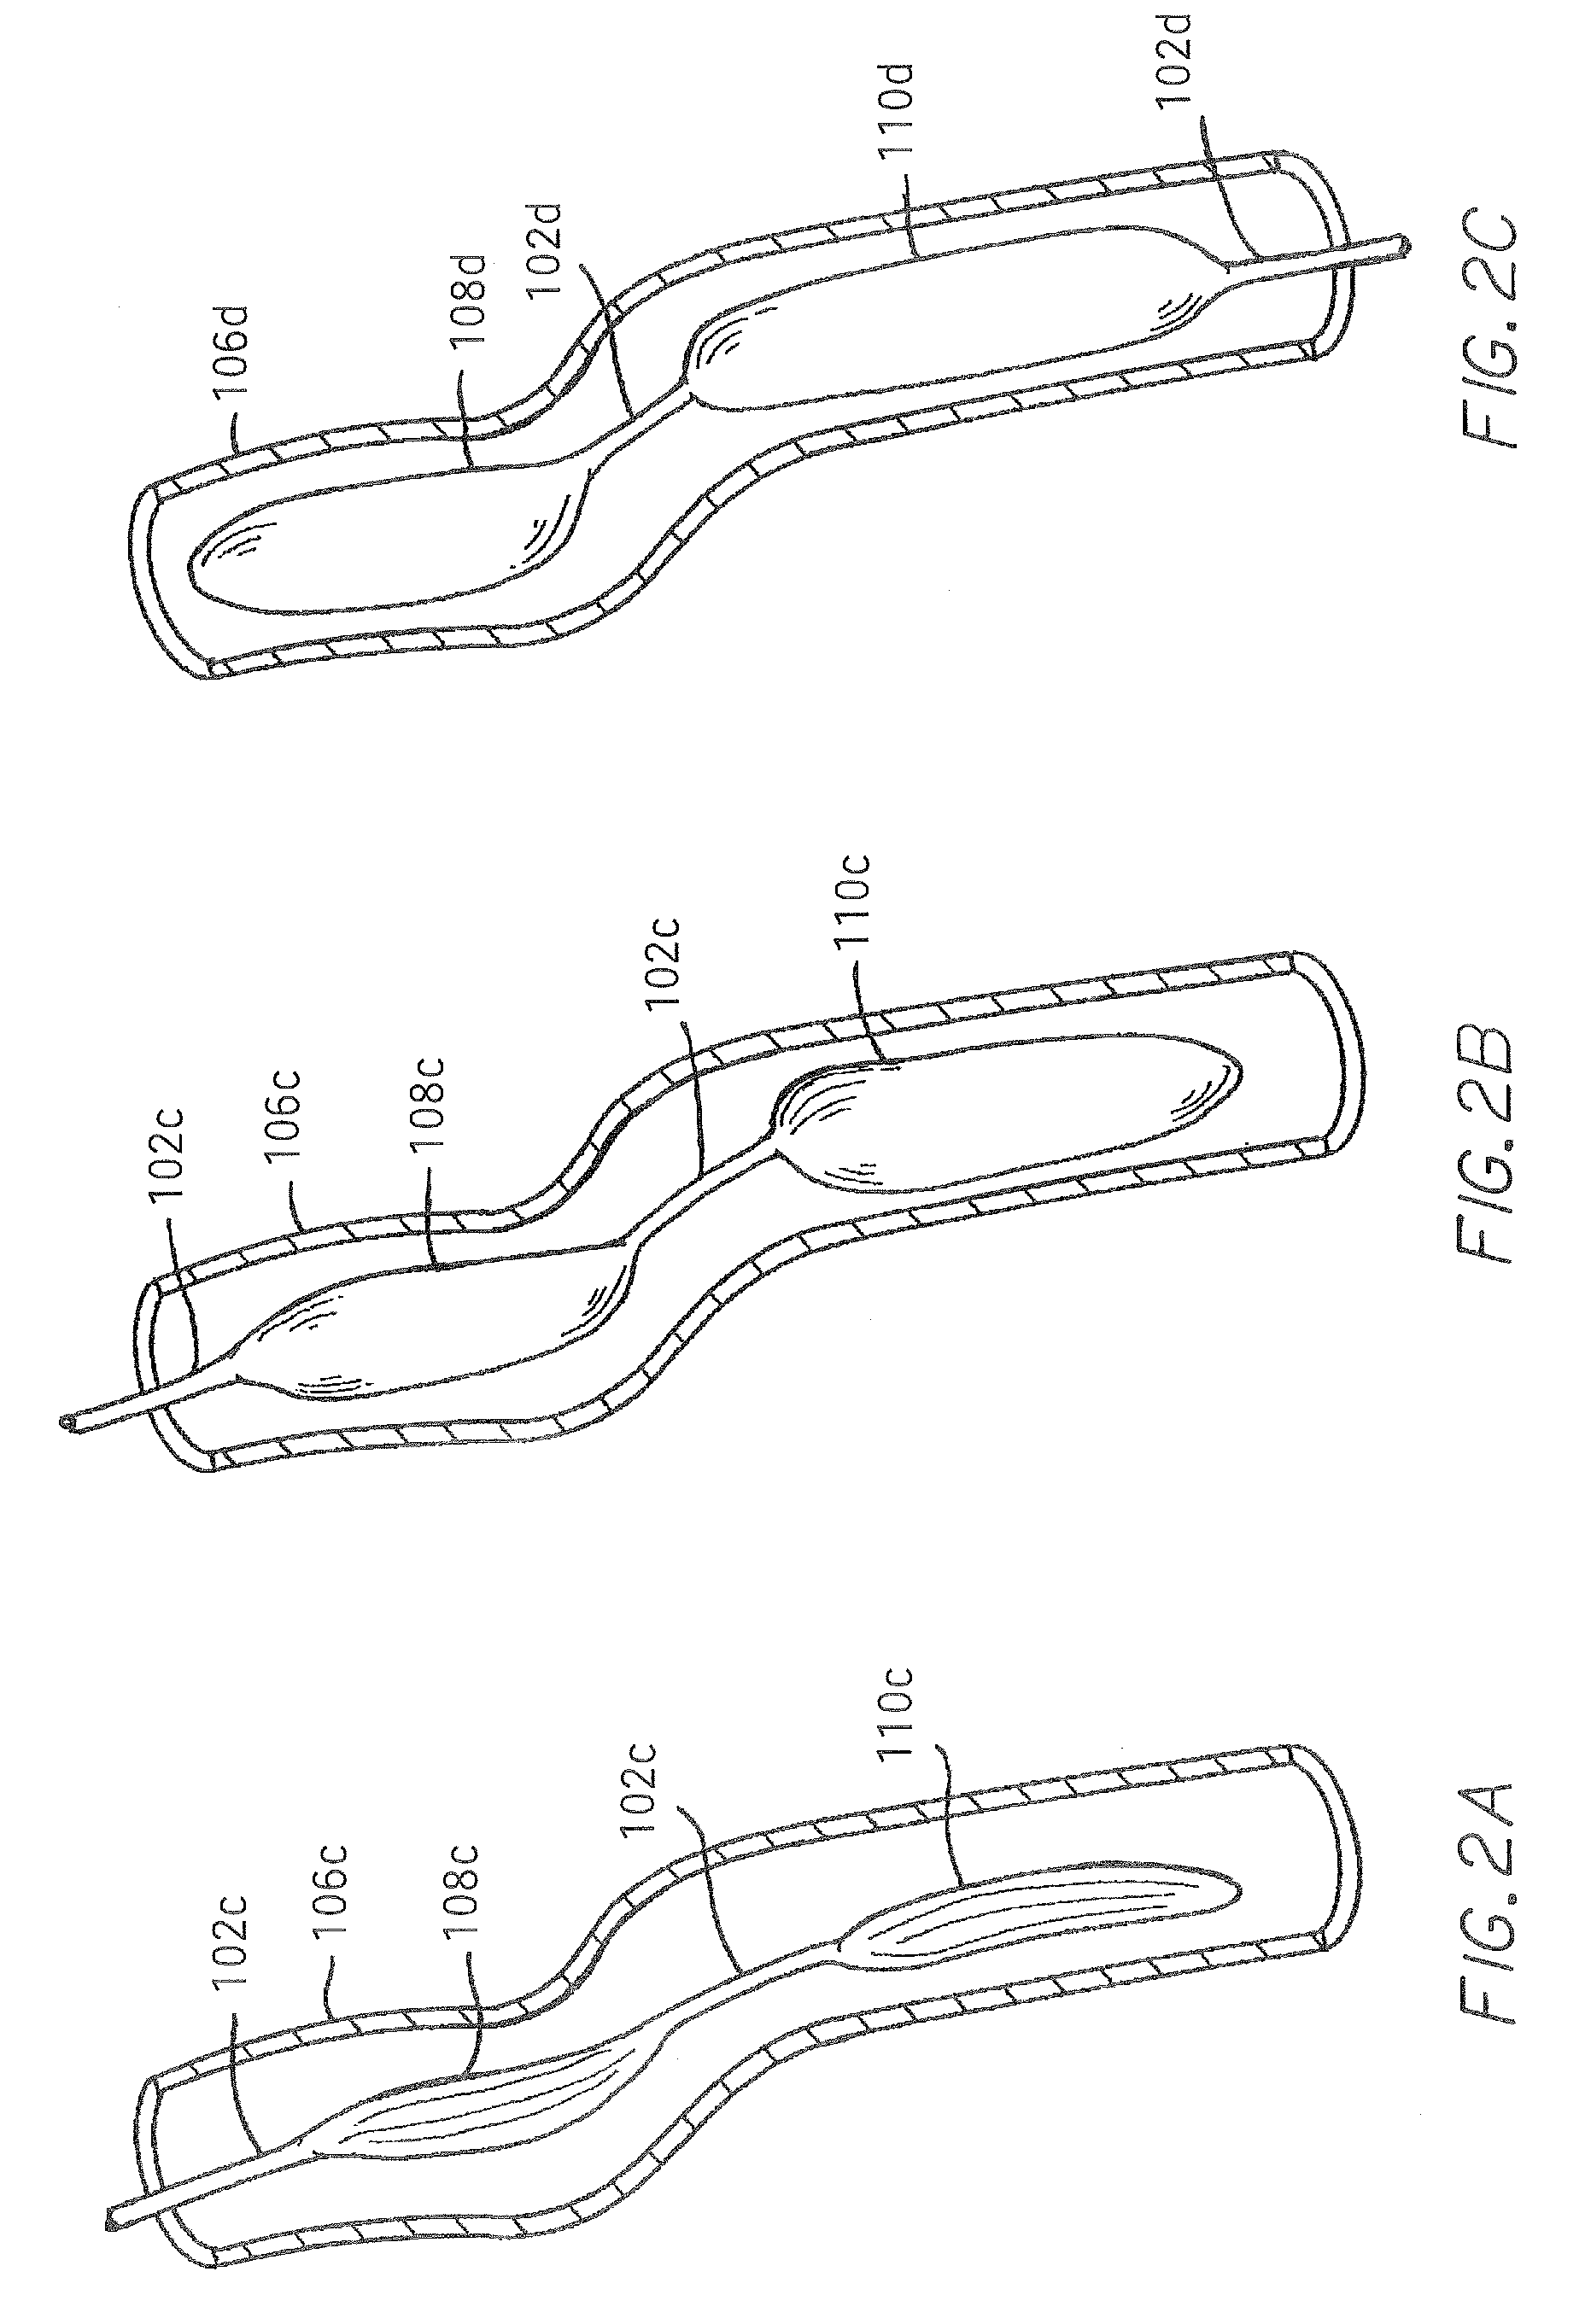 Methods of making aortic counter pulsation cardiac assist devices with three dimensional tortuous shape